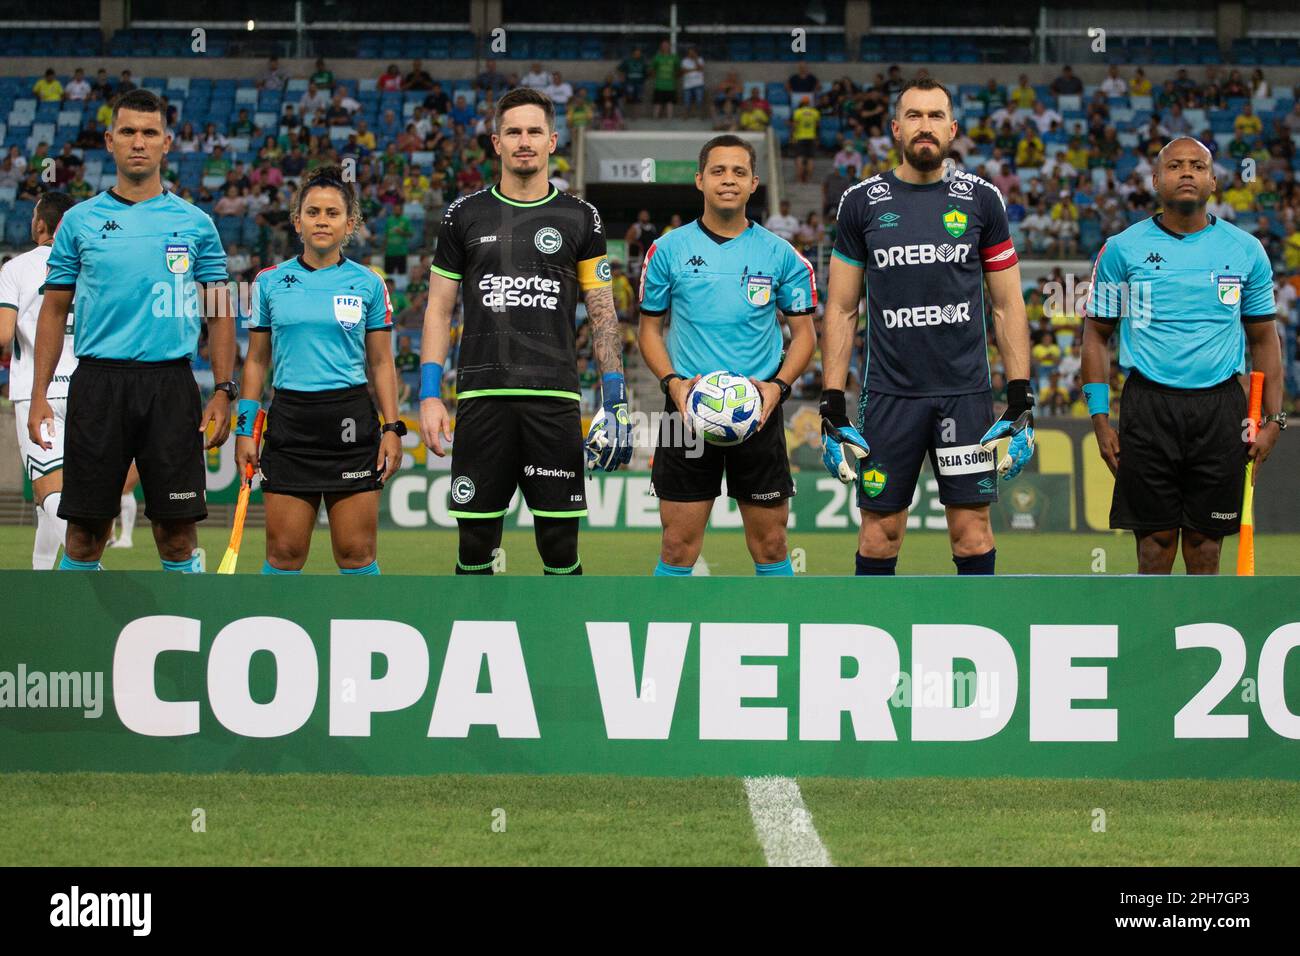 Cuiaba, Brazil. 26th Mar, 2023. MT - Cuiaba - 03/26/2023 - COPA VERDE 2023, CUIABA X GOIAS - Players from Cuiaba and Goias pose for photos next to the referee before the match at the Arena Pantanal stadium for the 2023 Copa Verde championship. Photo: Gil Gomes/AGIF/Sipa USA Credit: Sipa USA/Alamy Live News Stock Photo